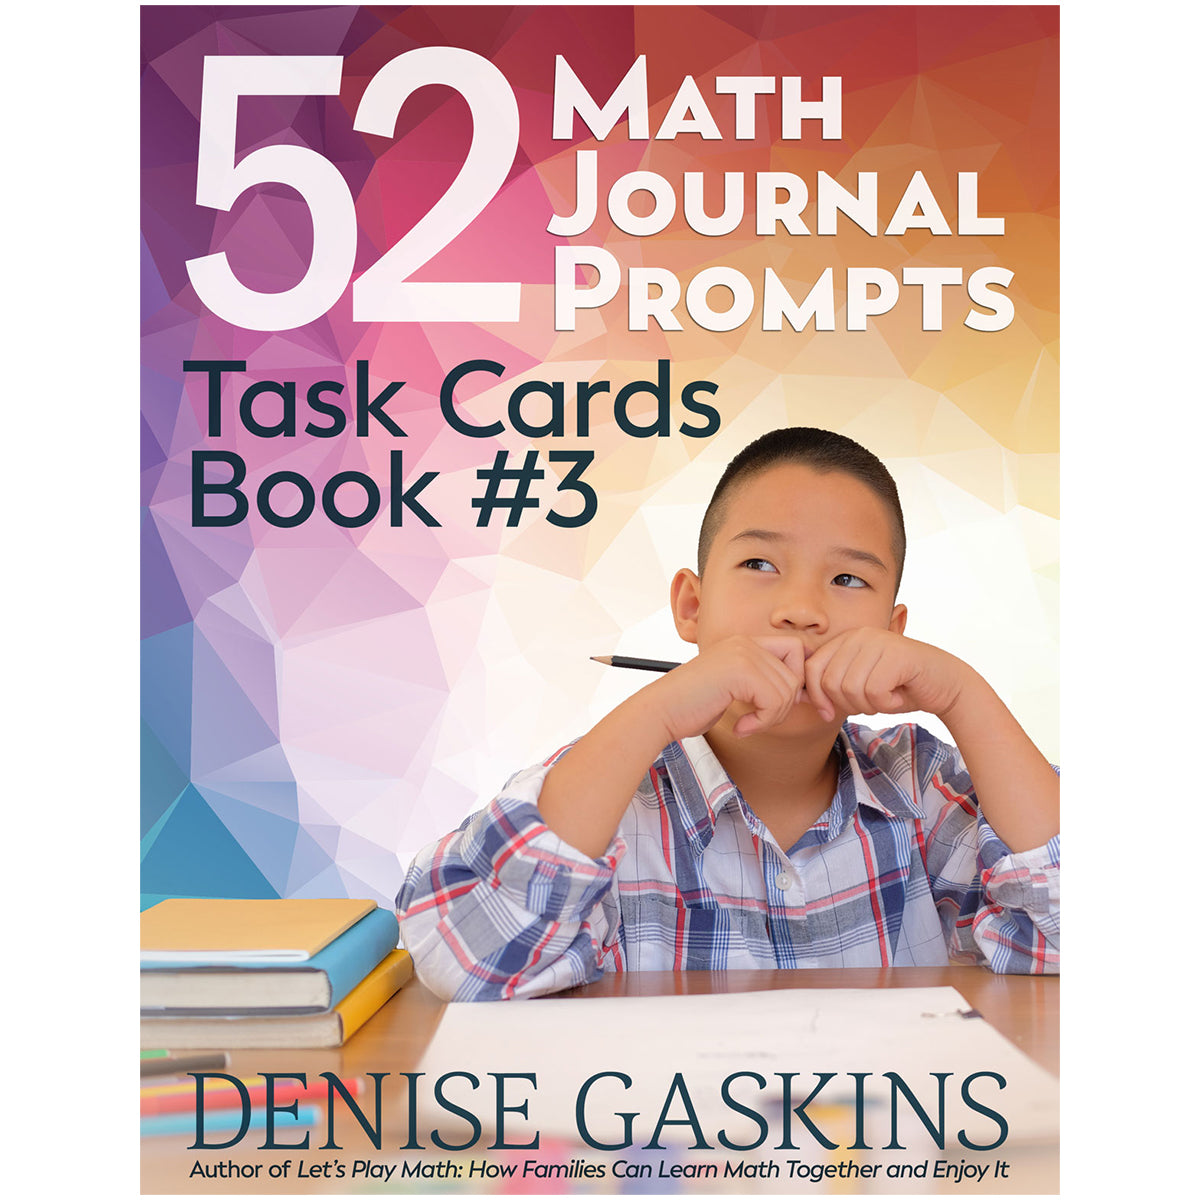 Math Journal Prompts book three printable math activity book by Denise Gaskins